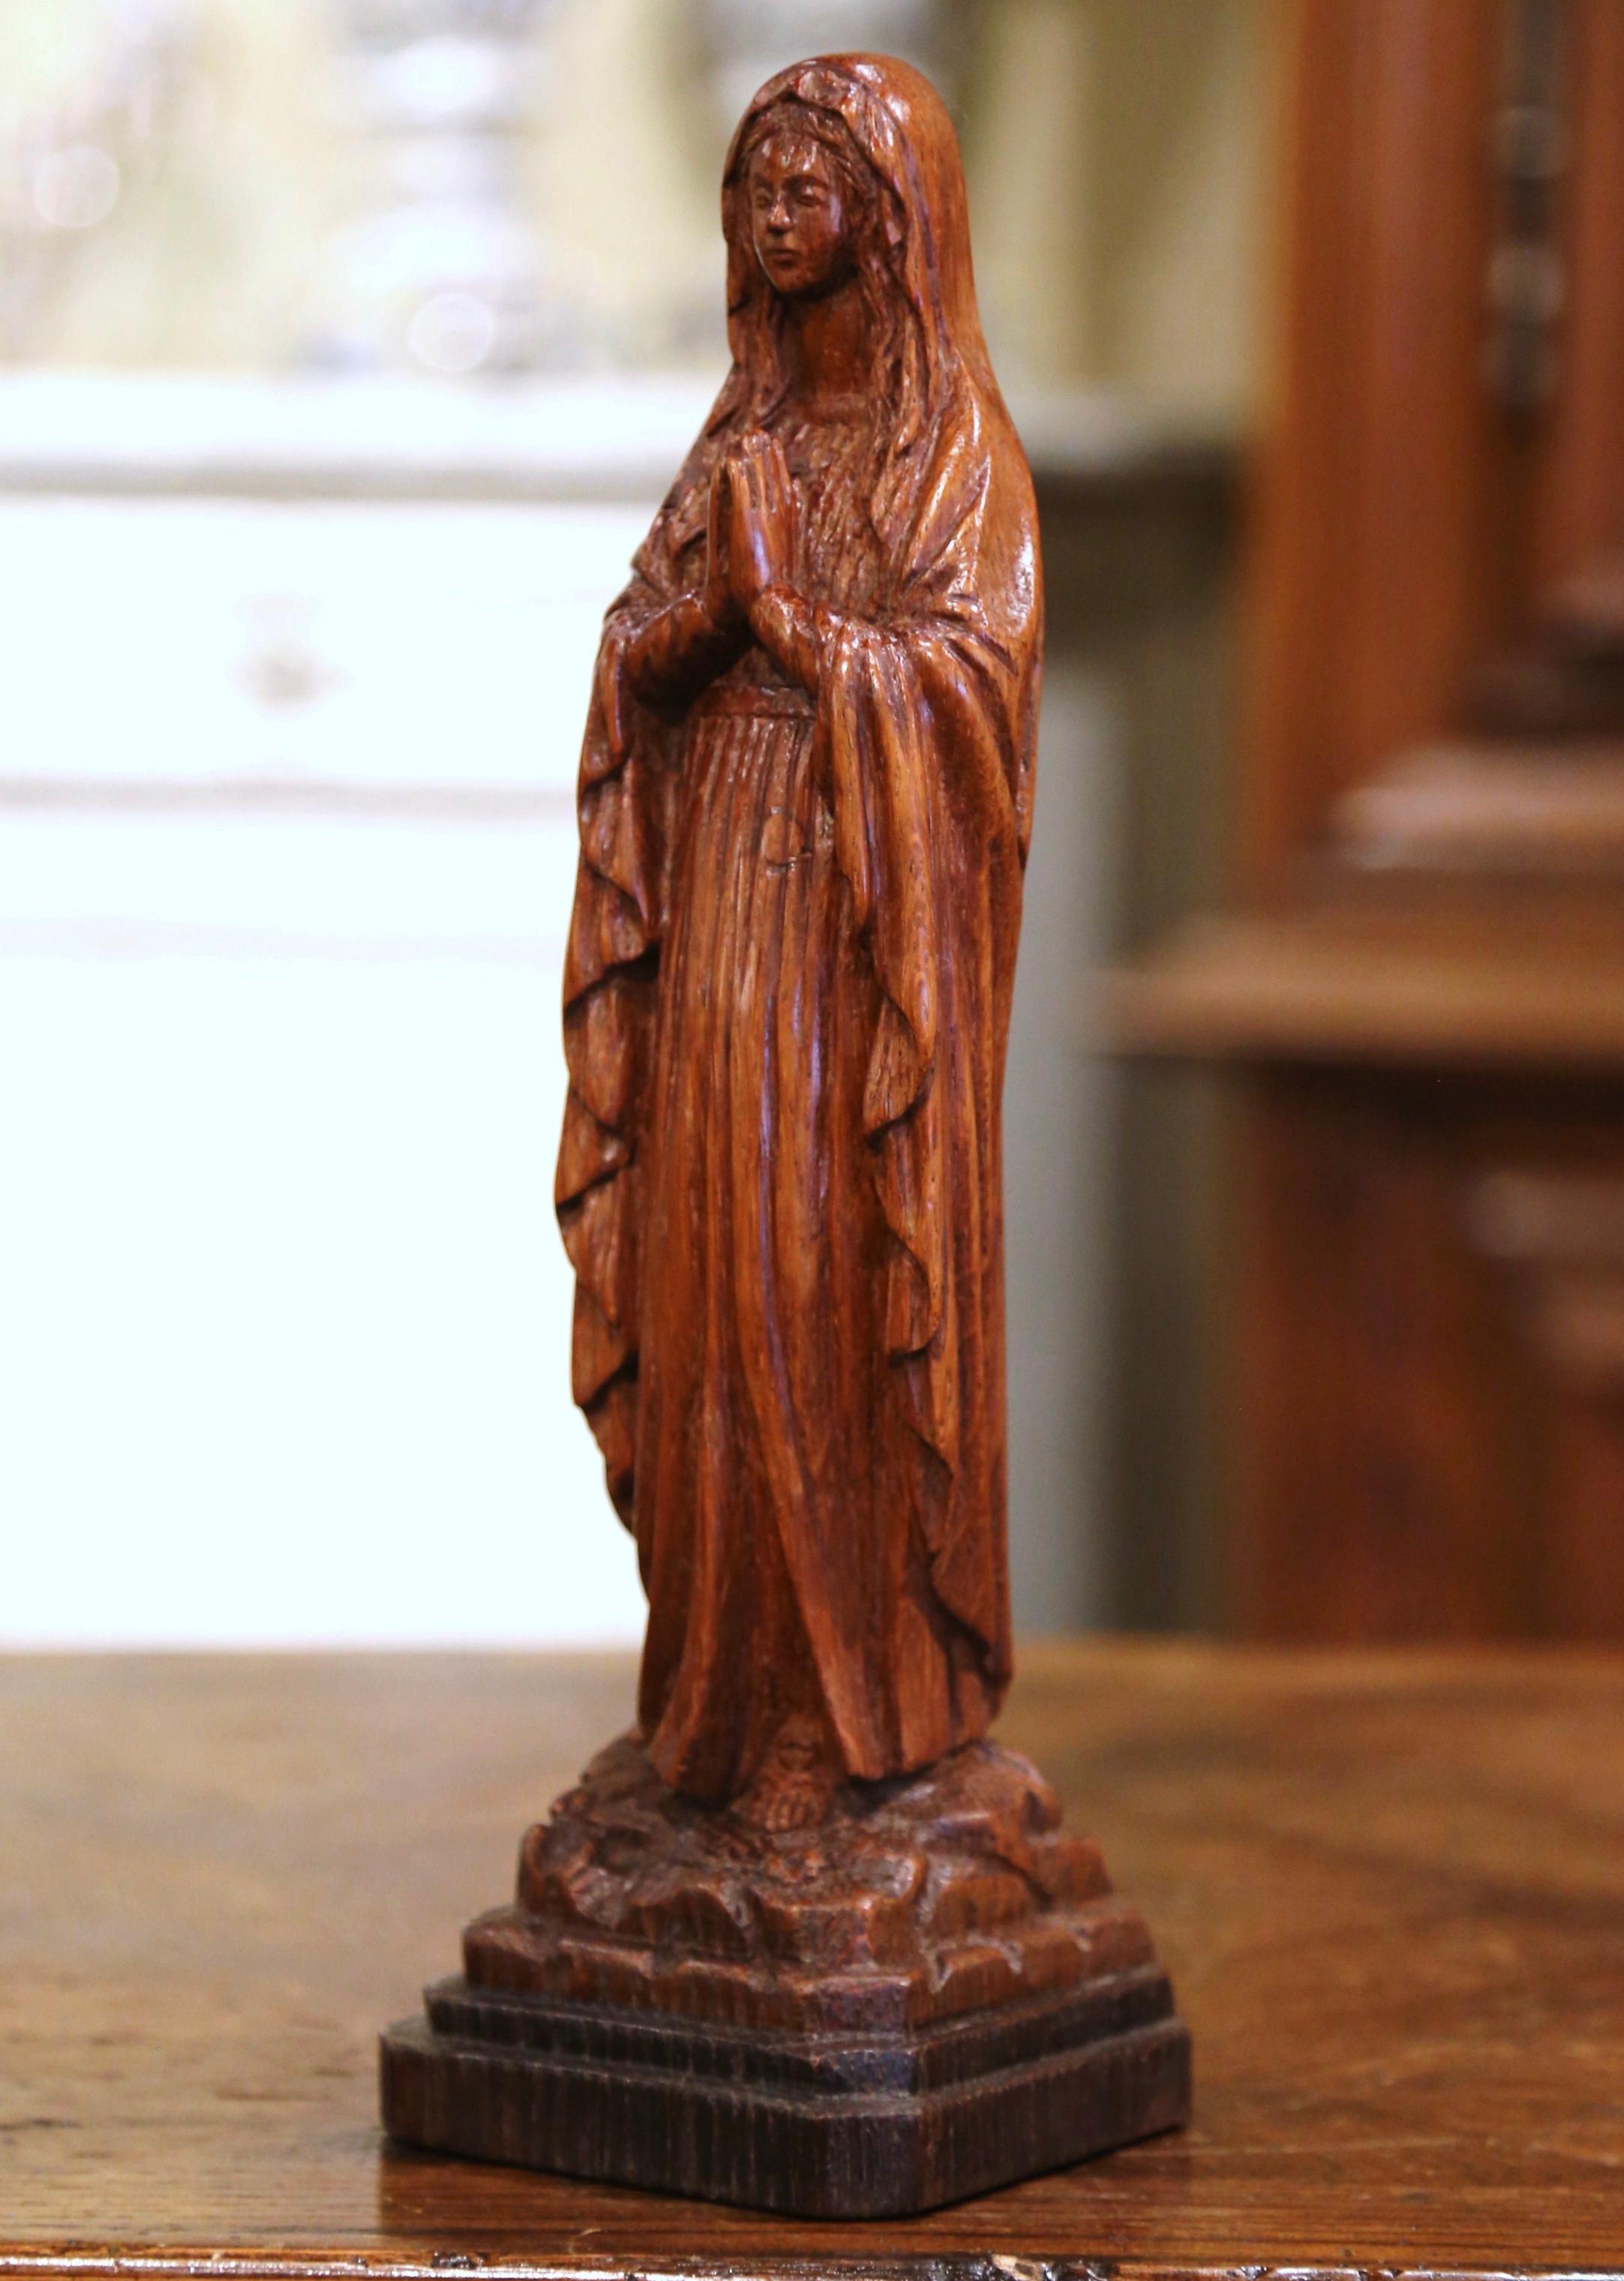 This elegant antique sculpture of Madonna was created in Normandy, France, circa 1880. Hand carved with wonderful details, the Classic figure standing on a square base with rocky ground, depicts the Mother of our Lord Jesus Christ in prayers with